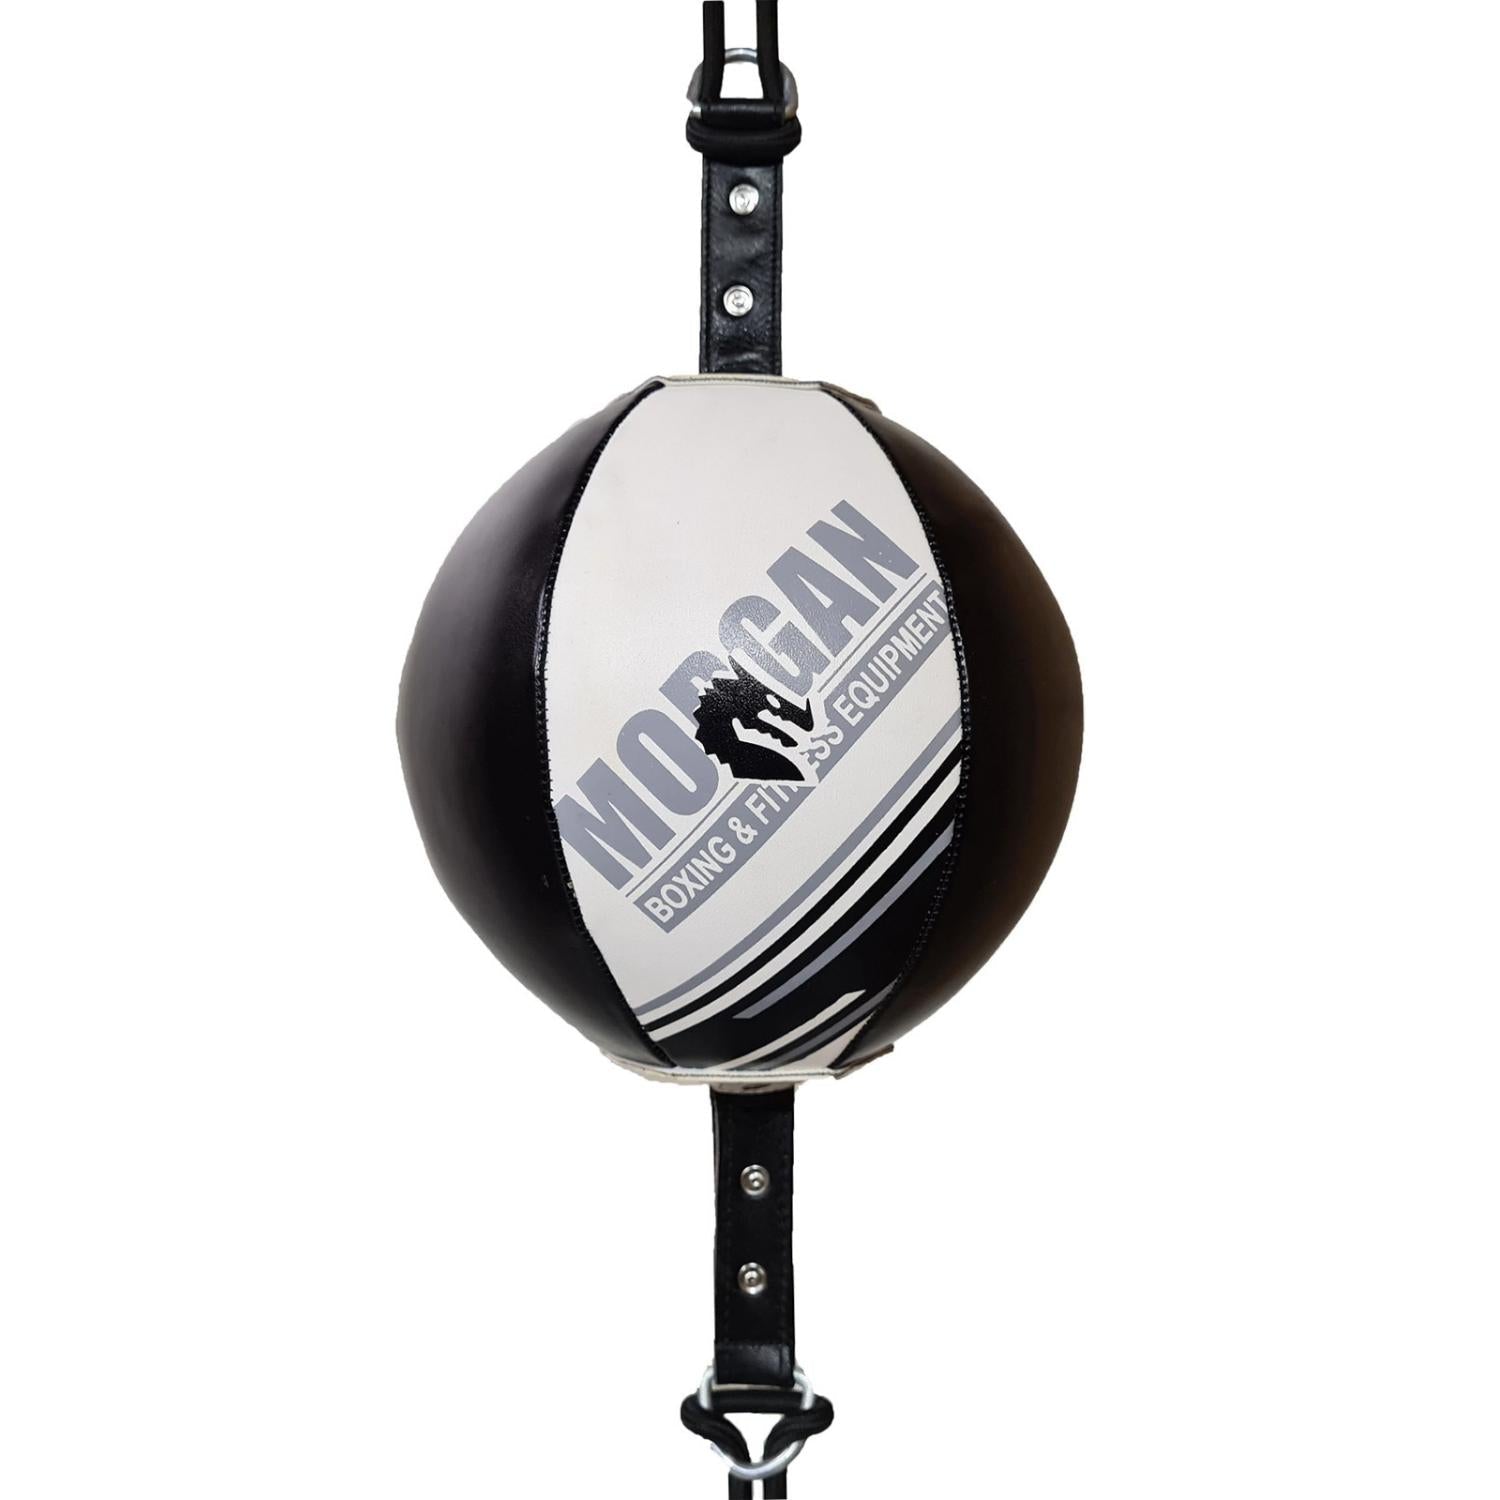 A floor-to-ceiling target double-ended punch bag is a great addition to any boxing facility. It helps boxers improve speed, coordination, agility and boxing reflexes. The Morgan 6" target floor to ceiling punch ball,